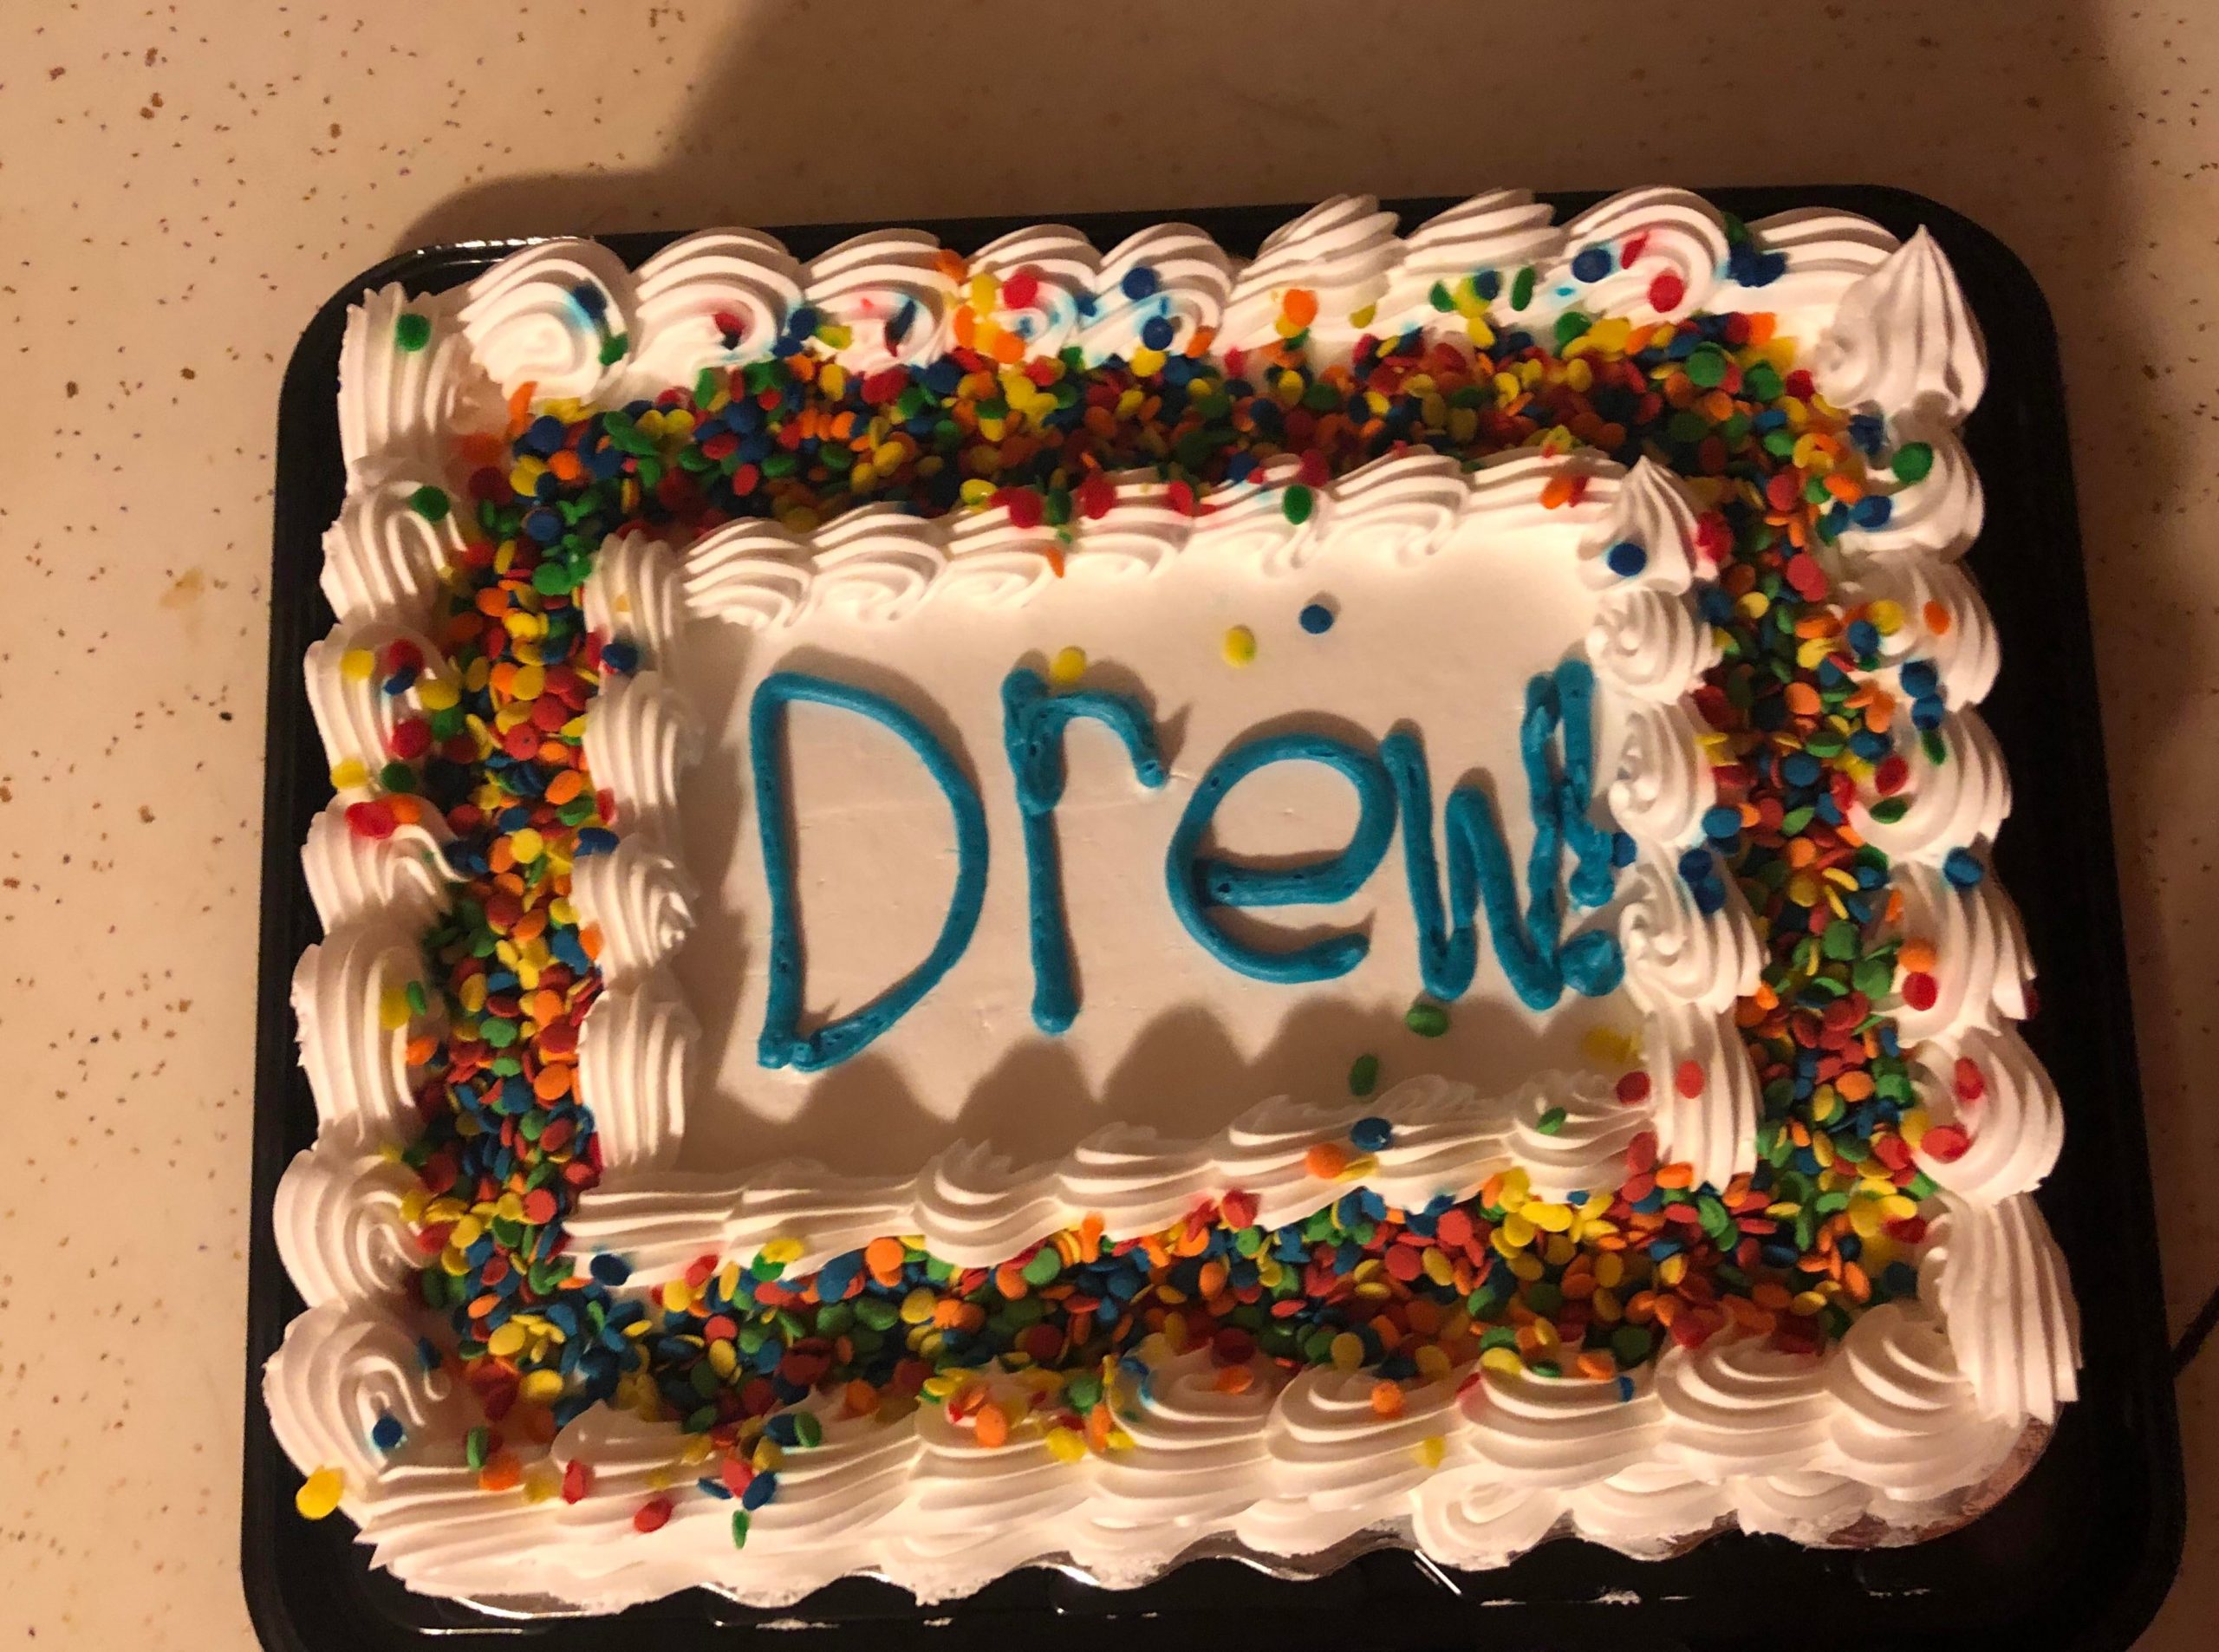 Asked the guy in the bakery to write Drew on my boyfriends birthday ...